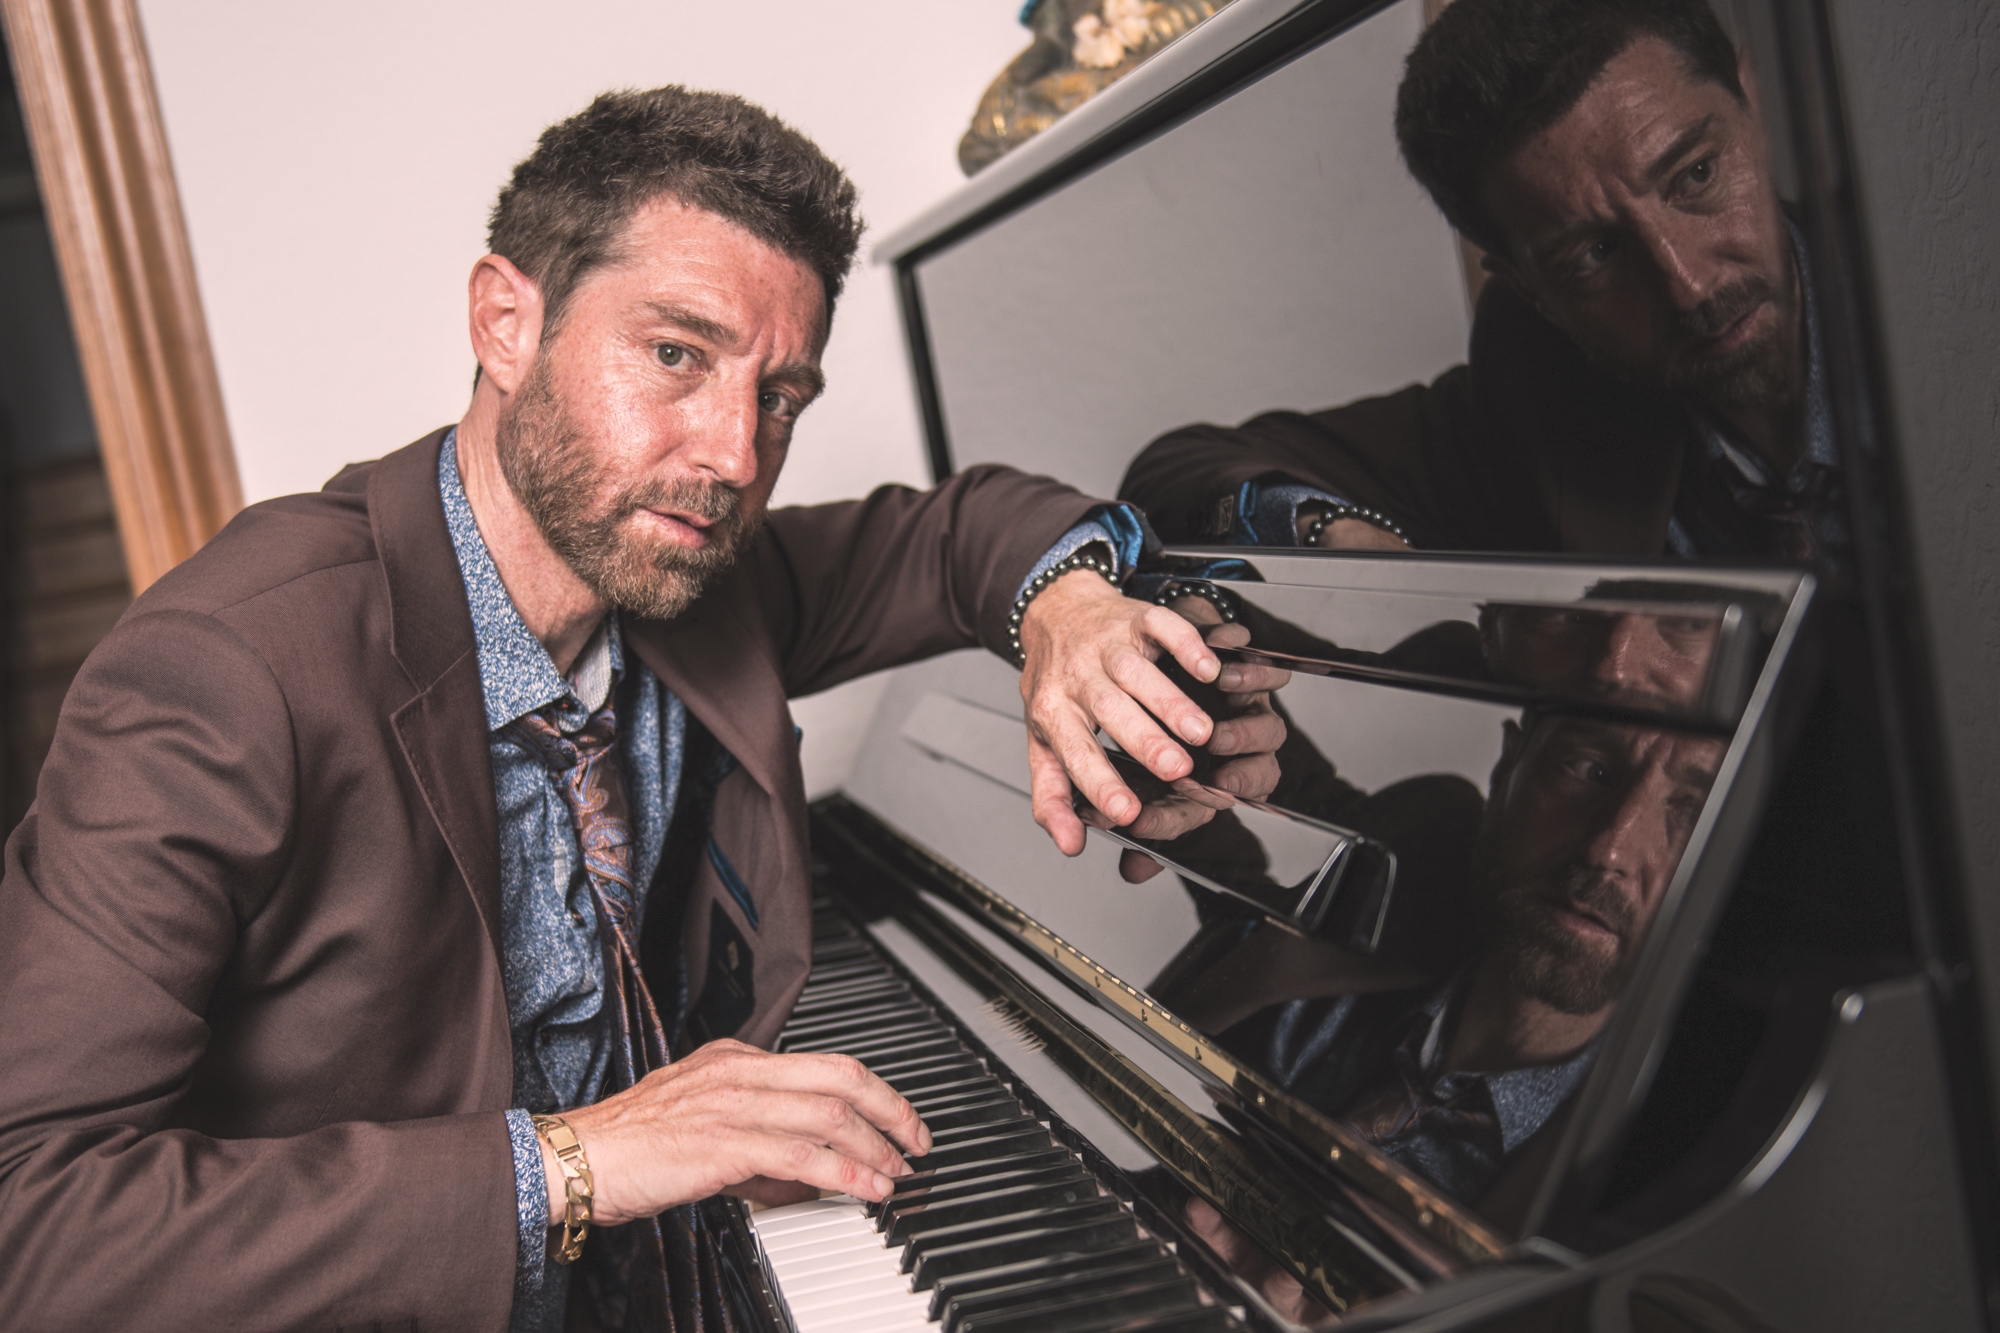 Benny Green giving new life to legacy of jazz piano in Atlanta show